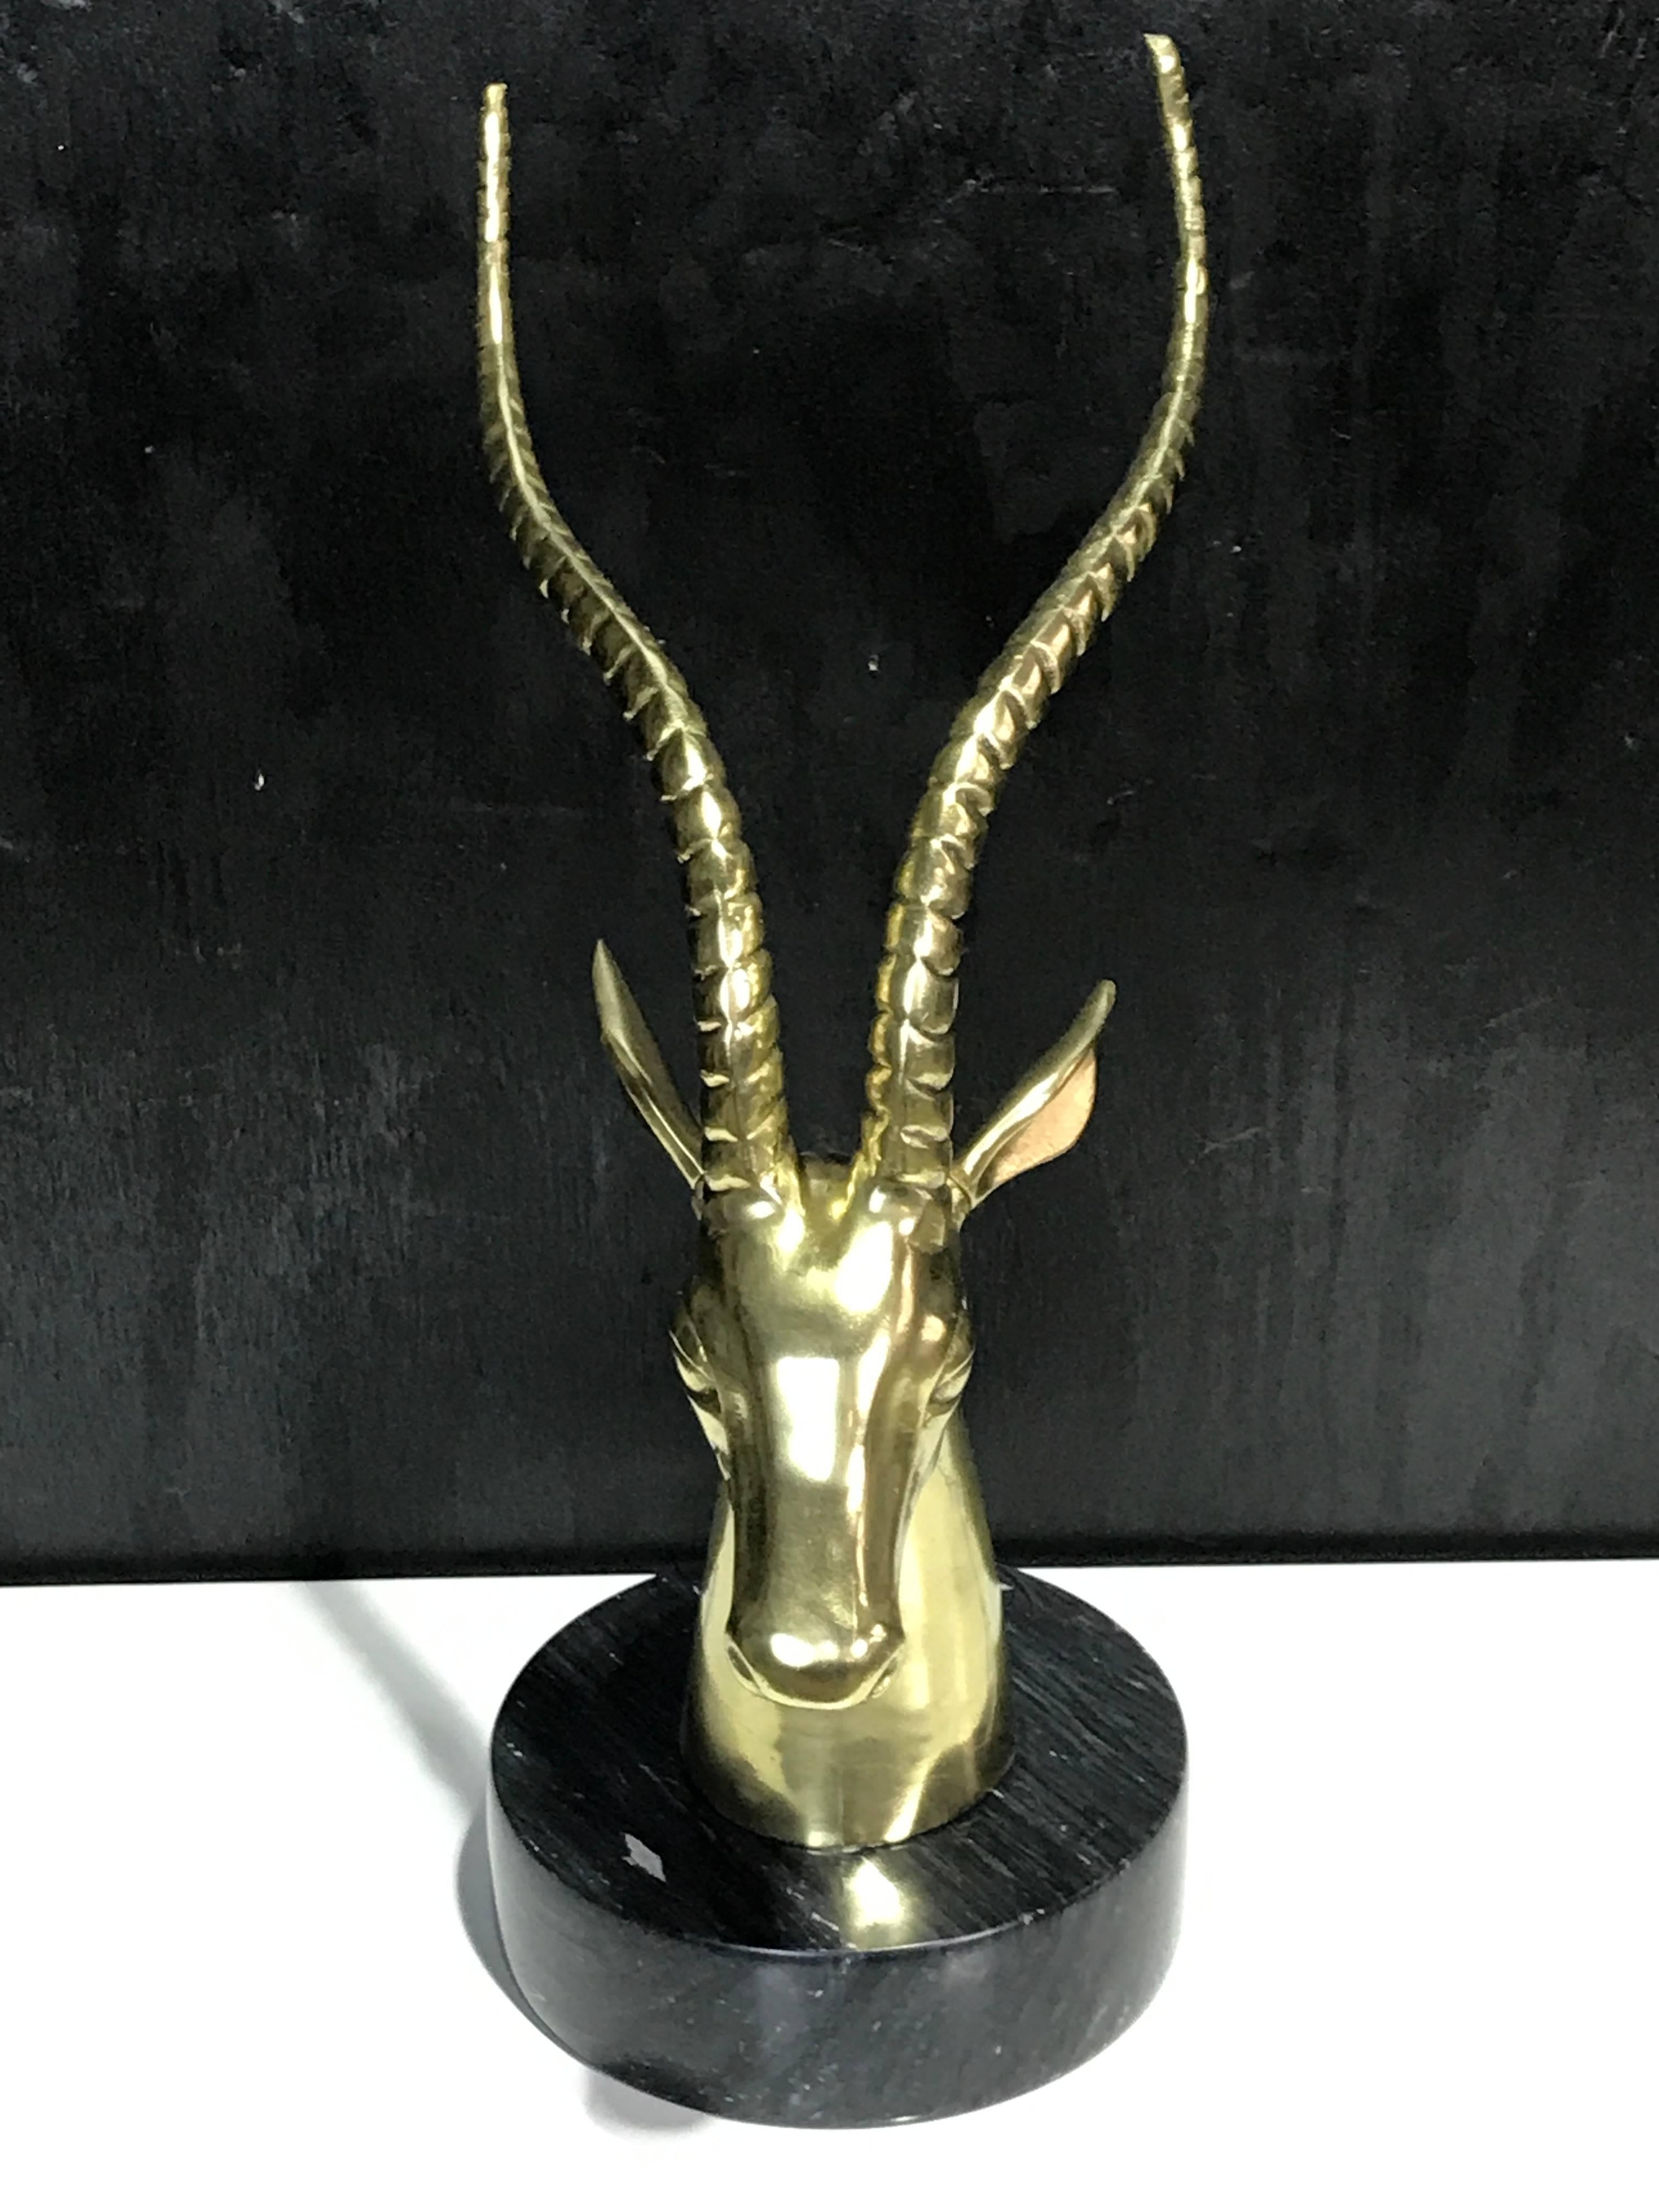 Midcentury brass sculpture of an Ibex, with a 7